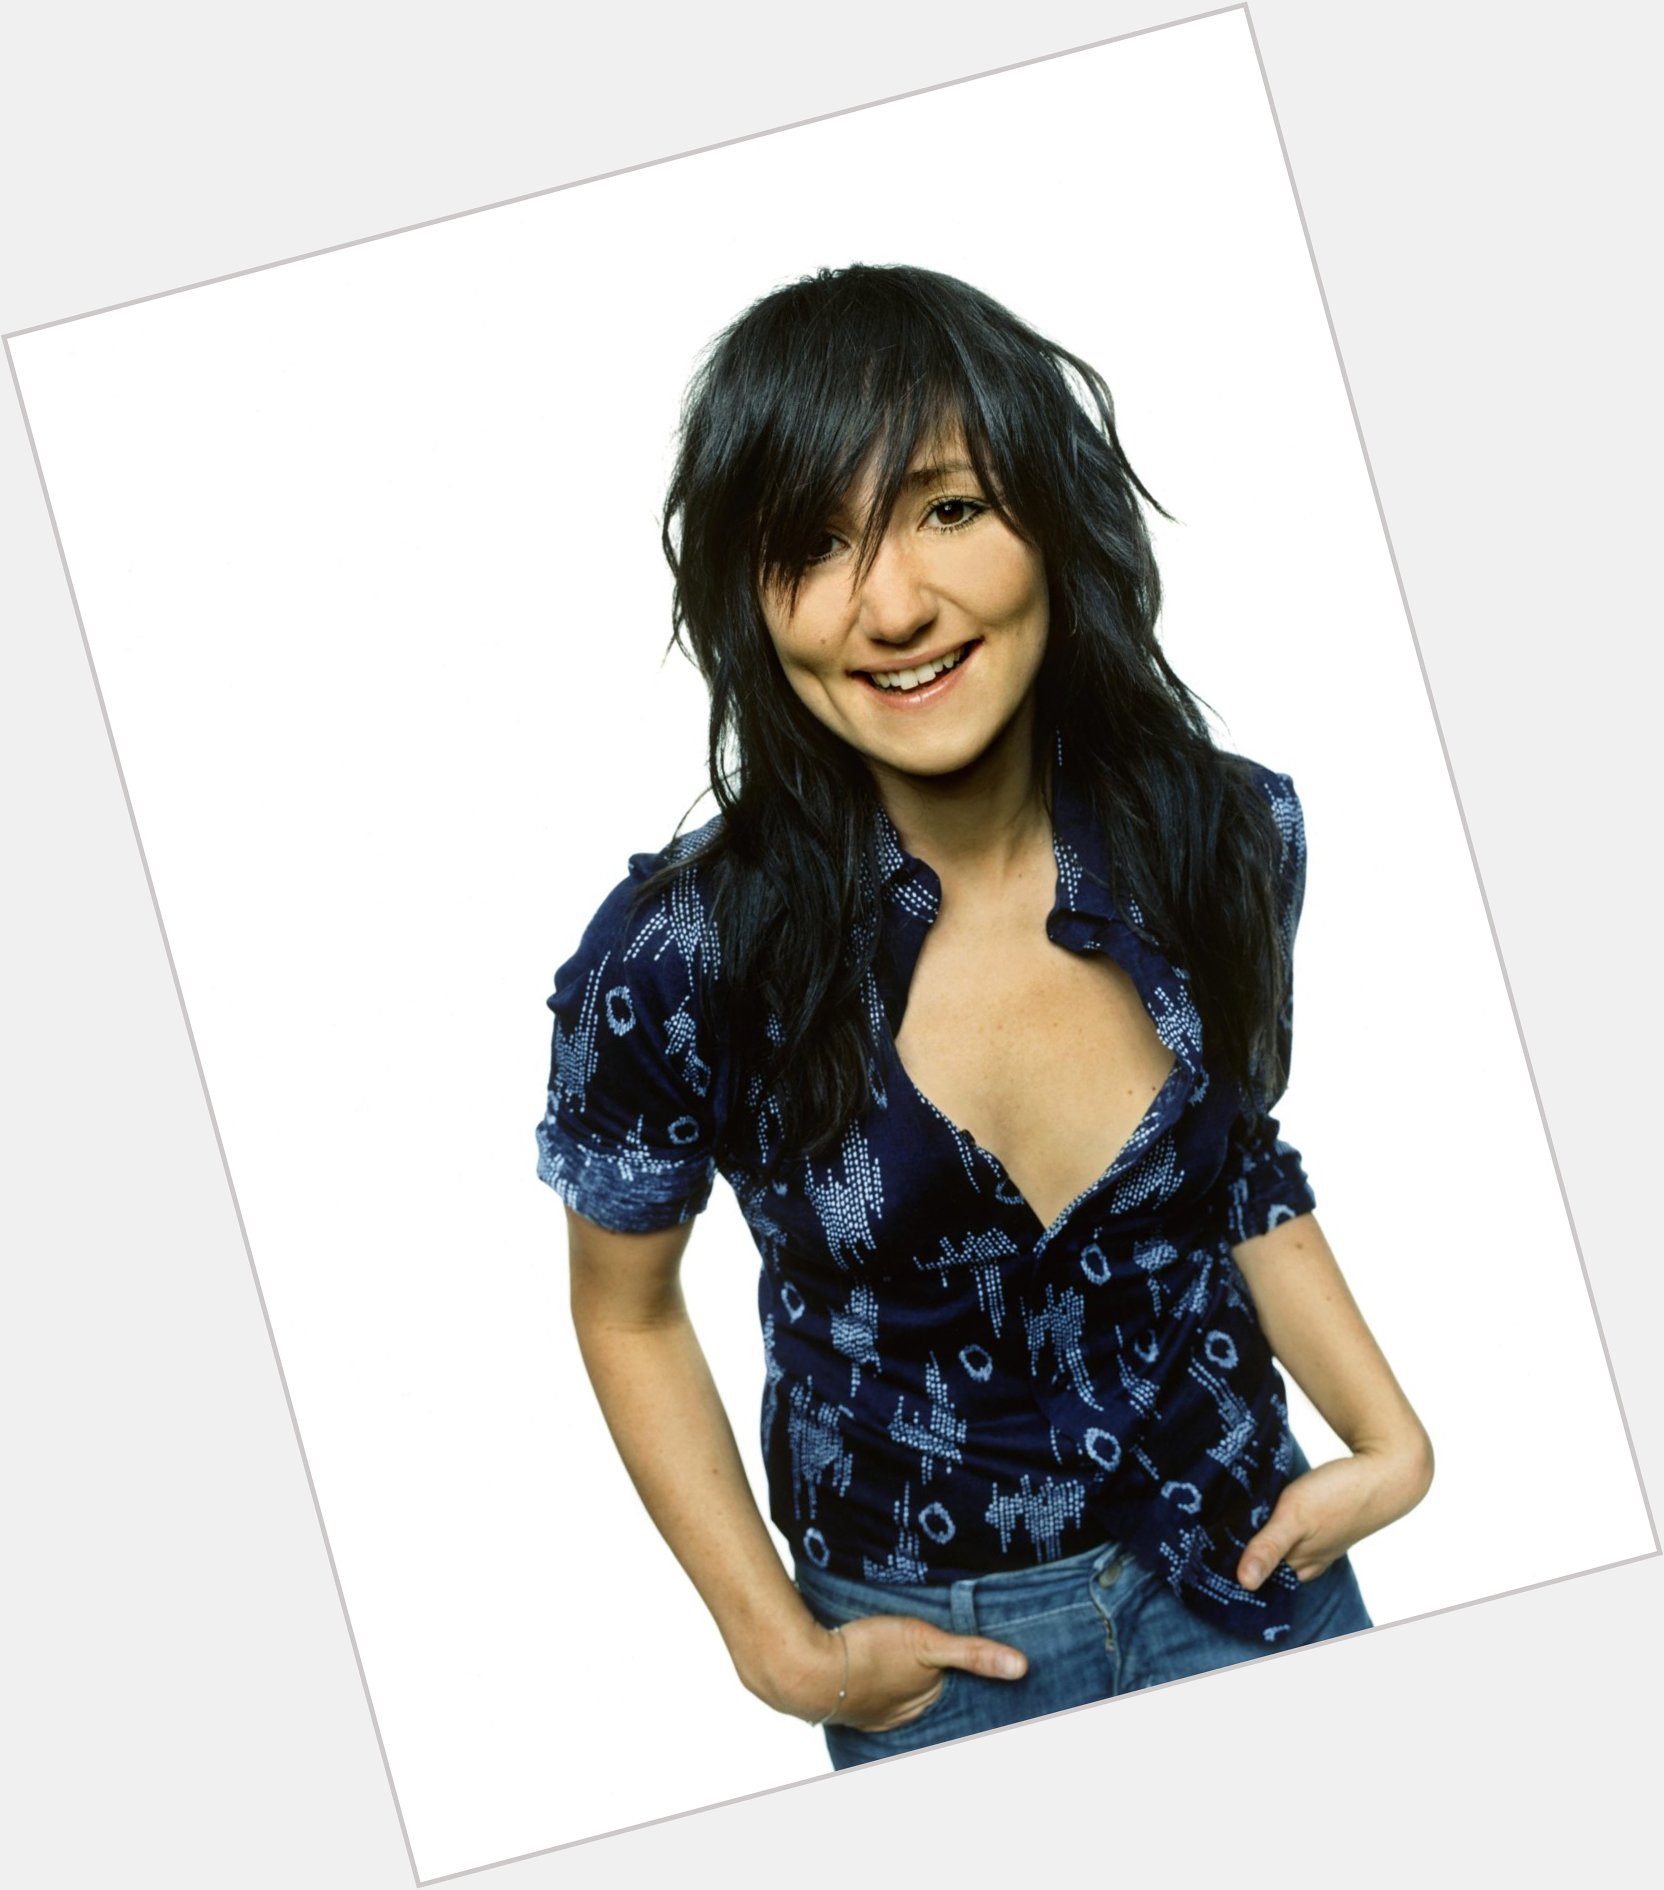 KT Tunstall hairstyle 8